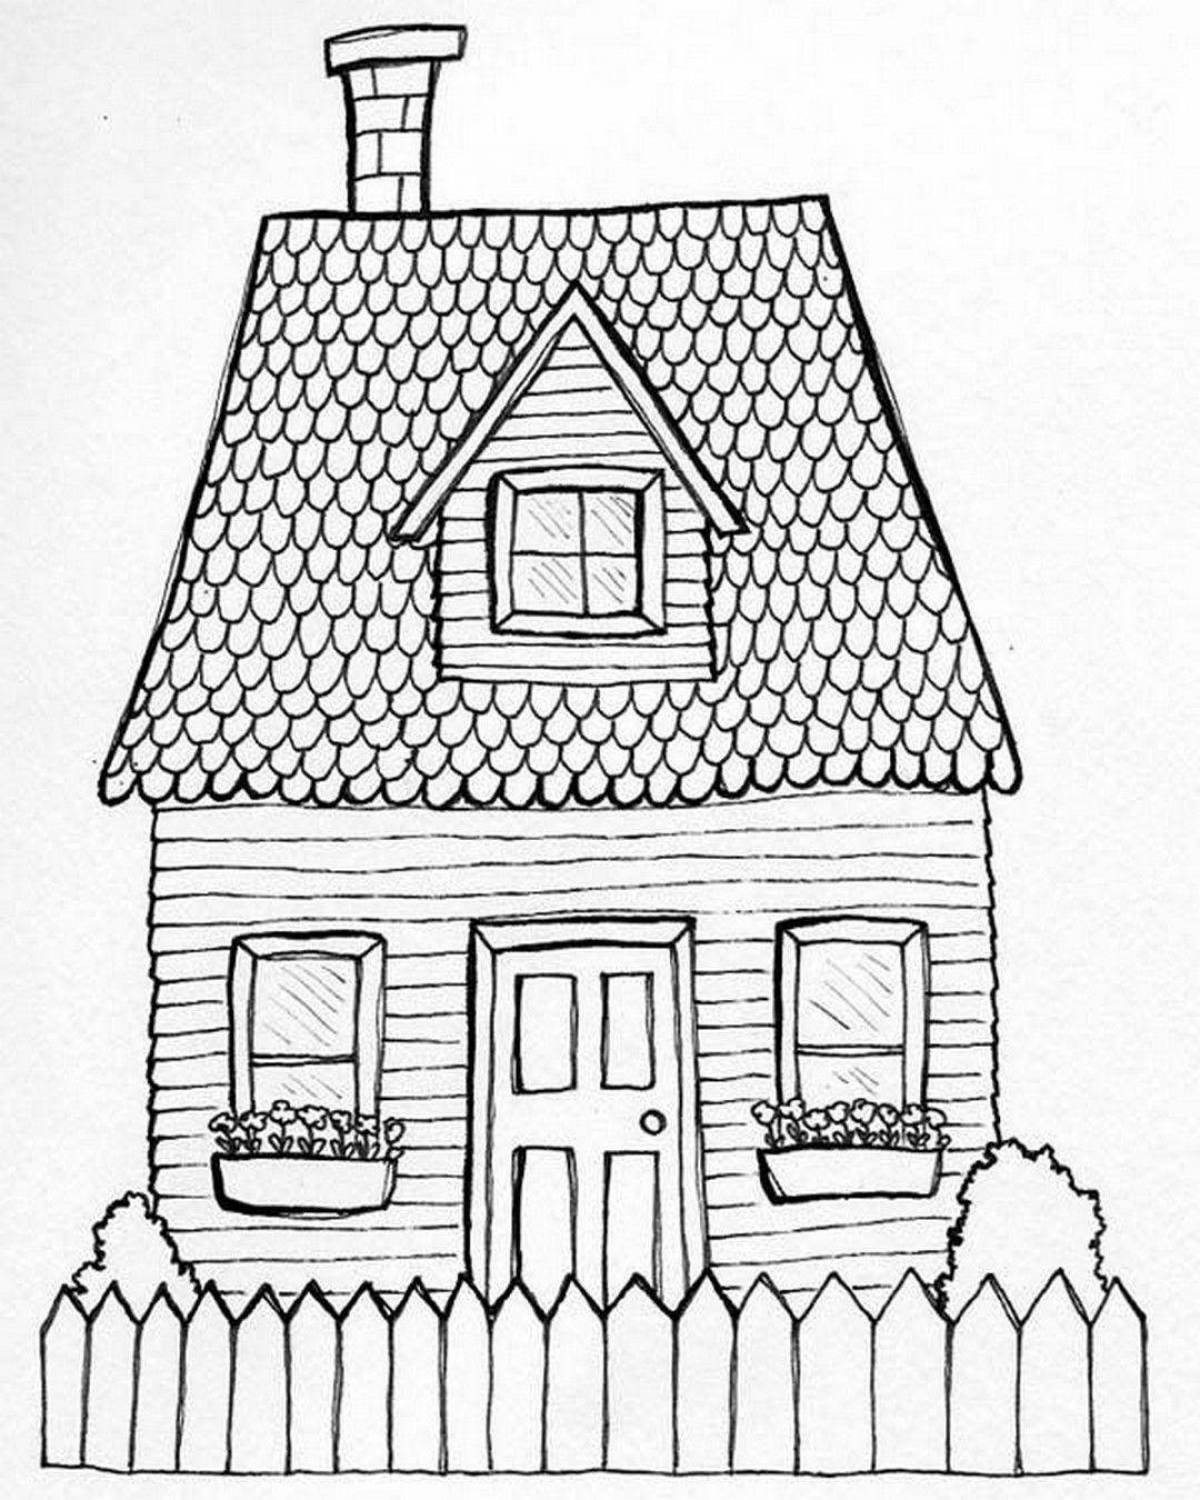 Coloring page of a large country house